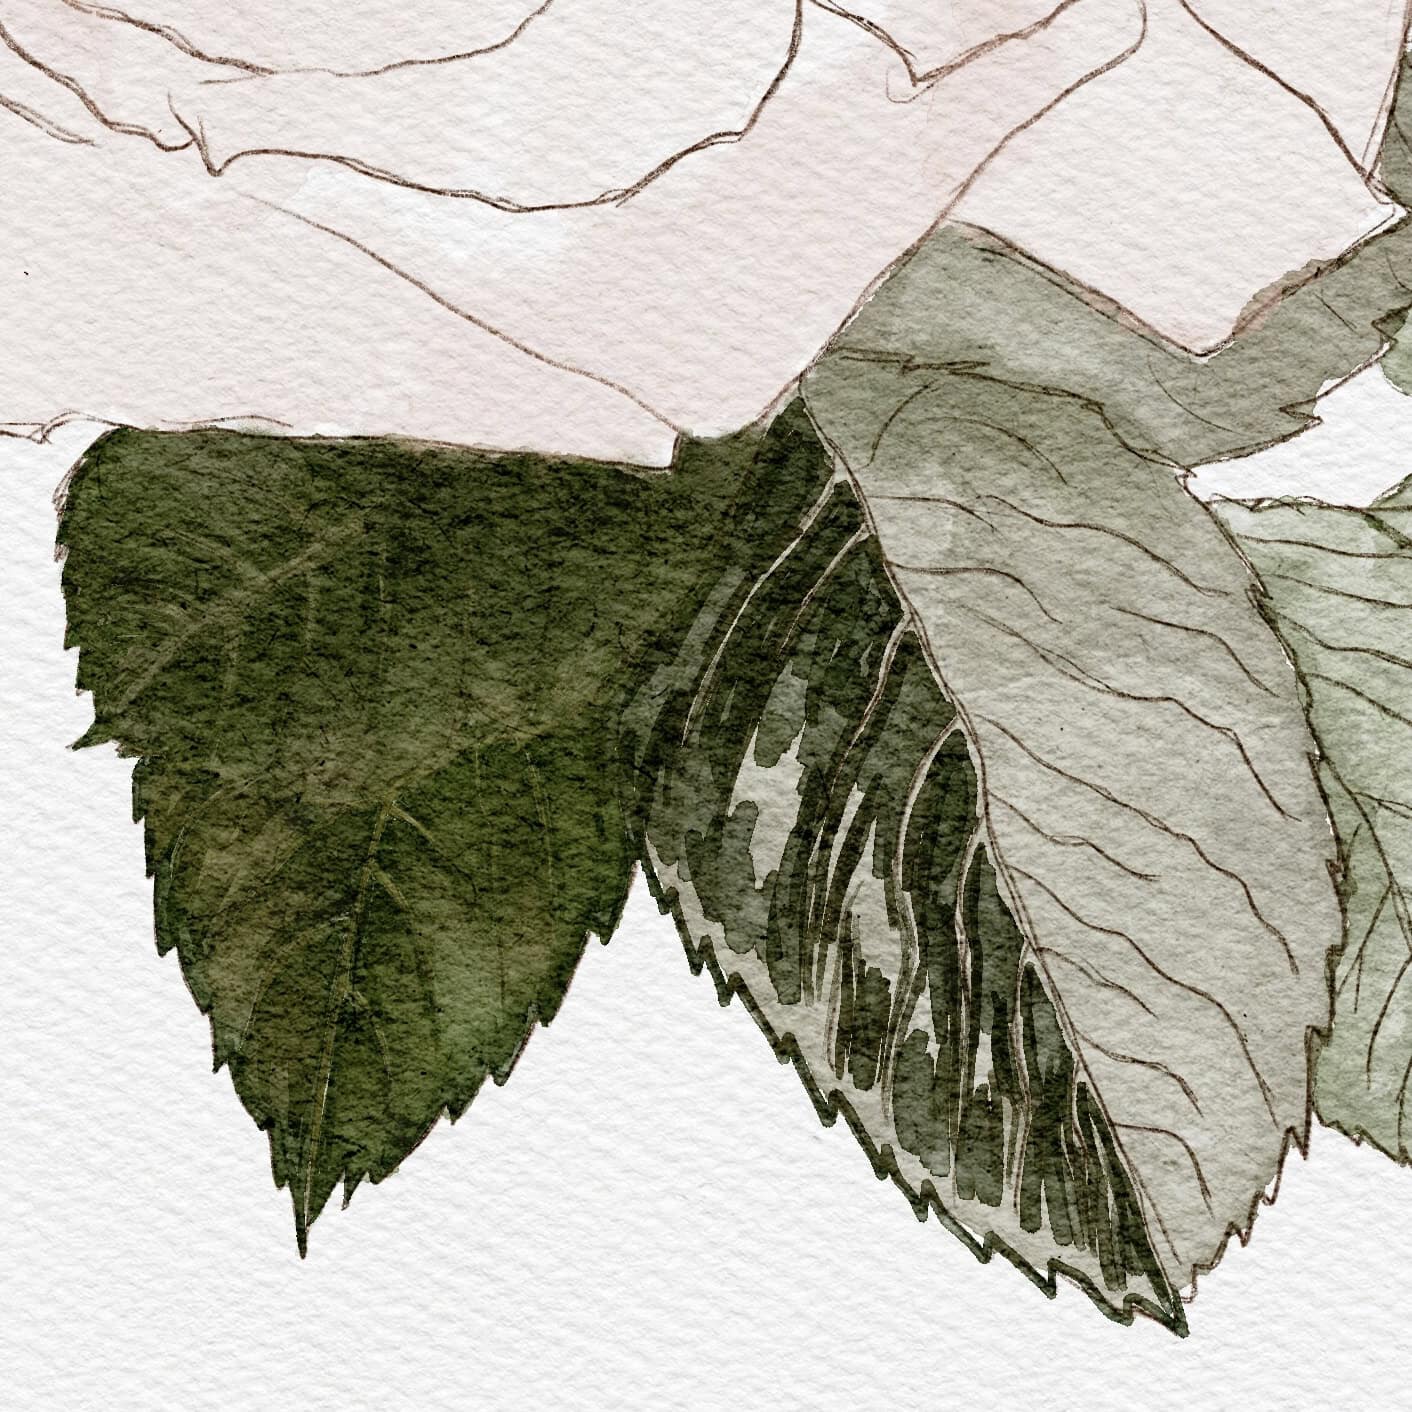 How to paint leaves